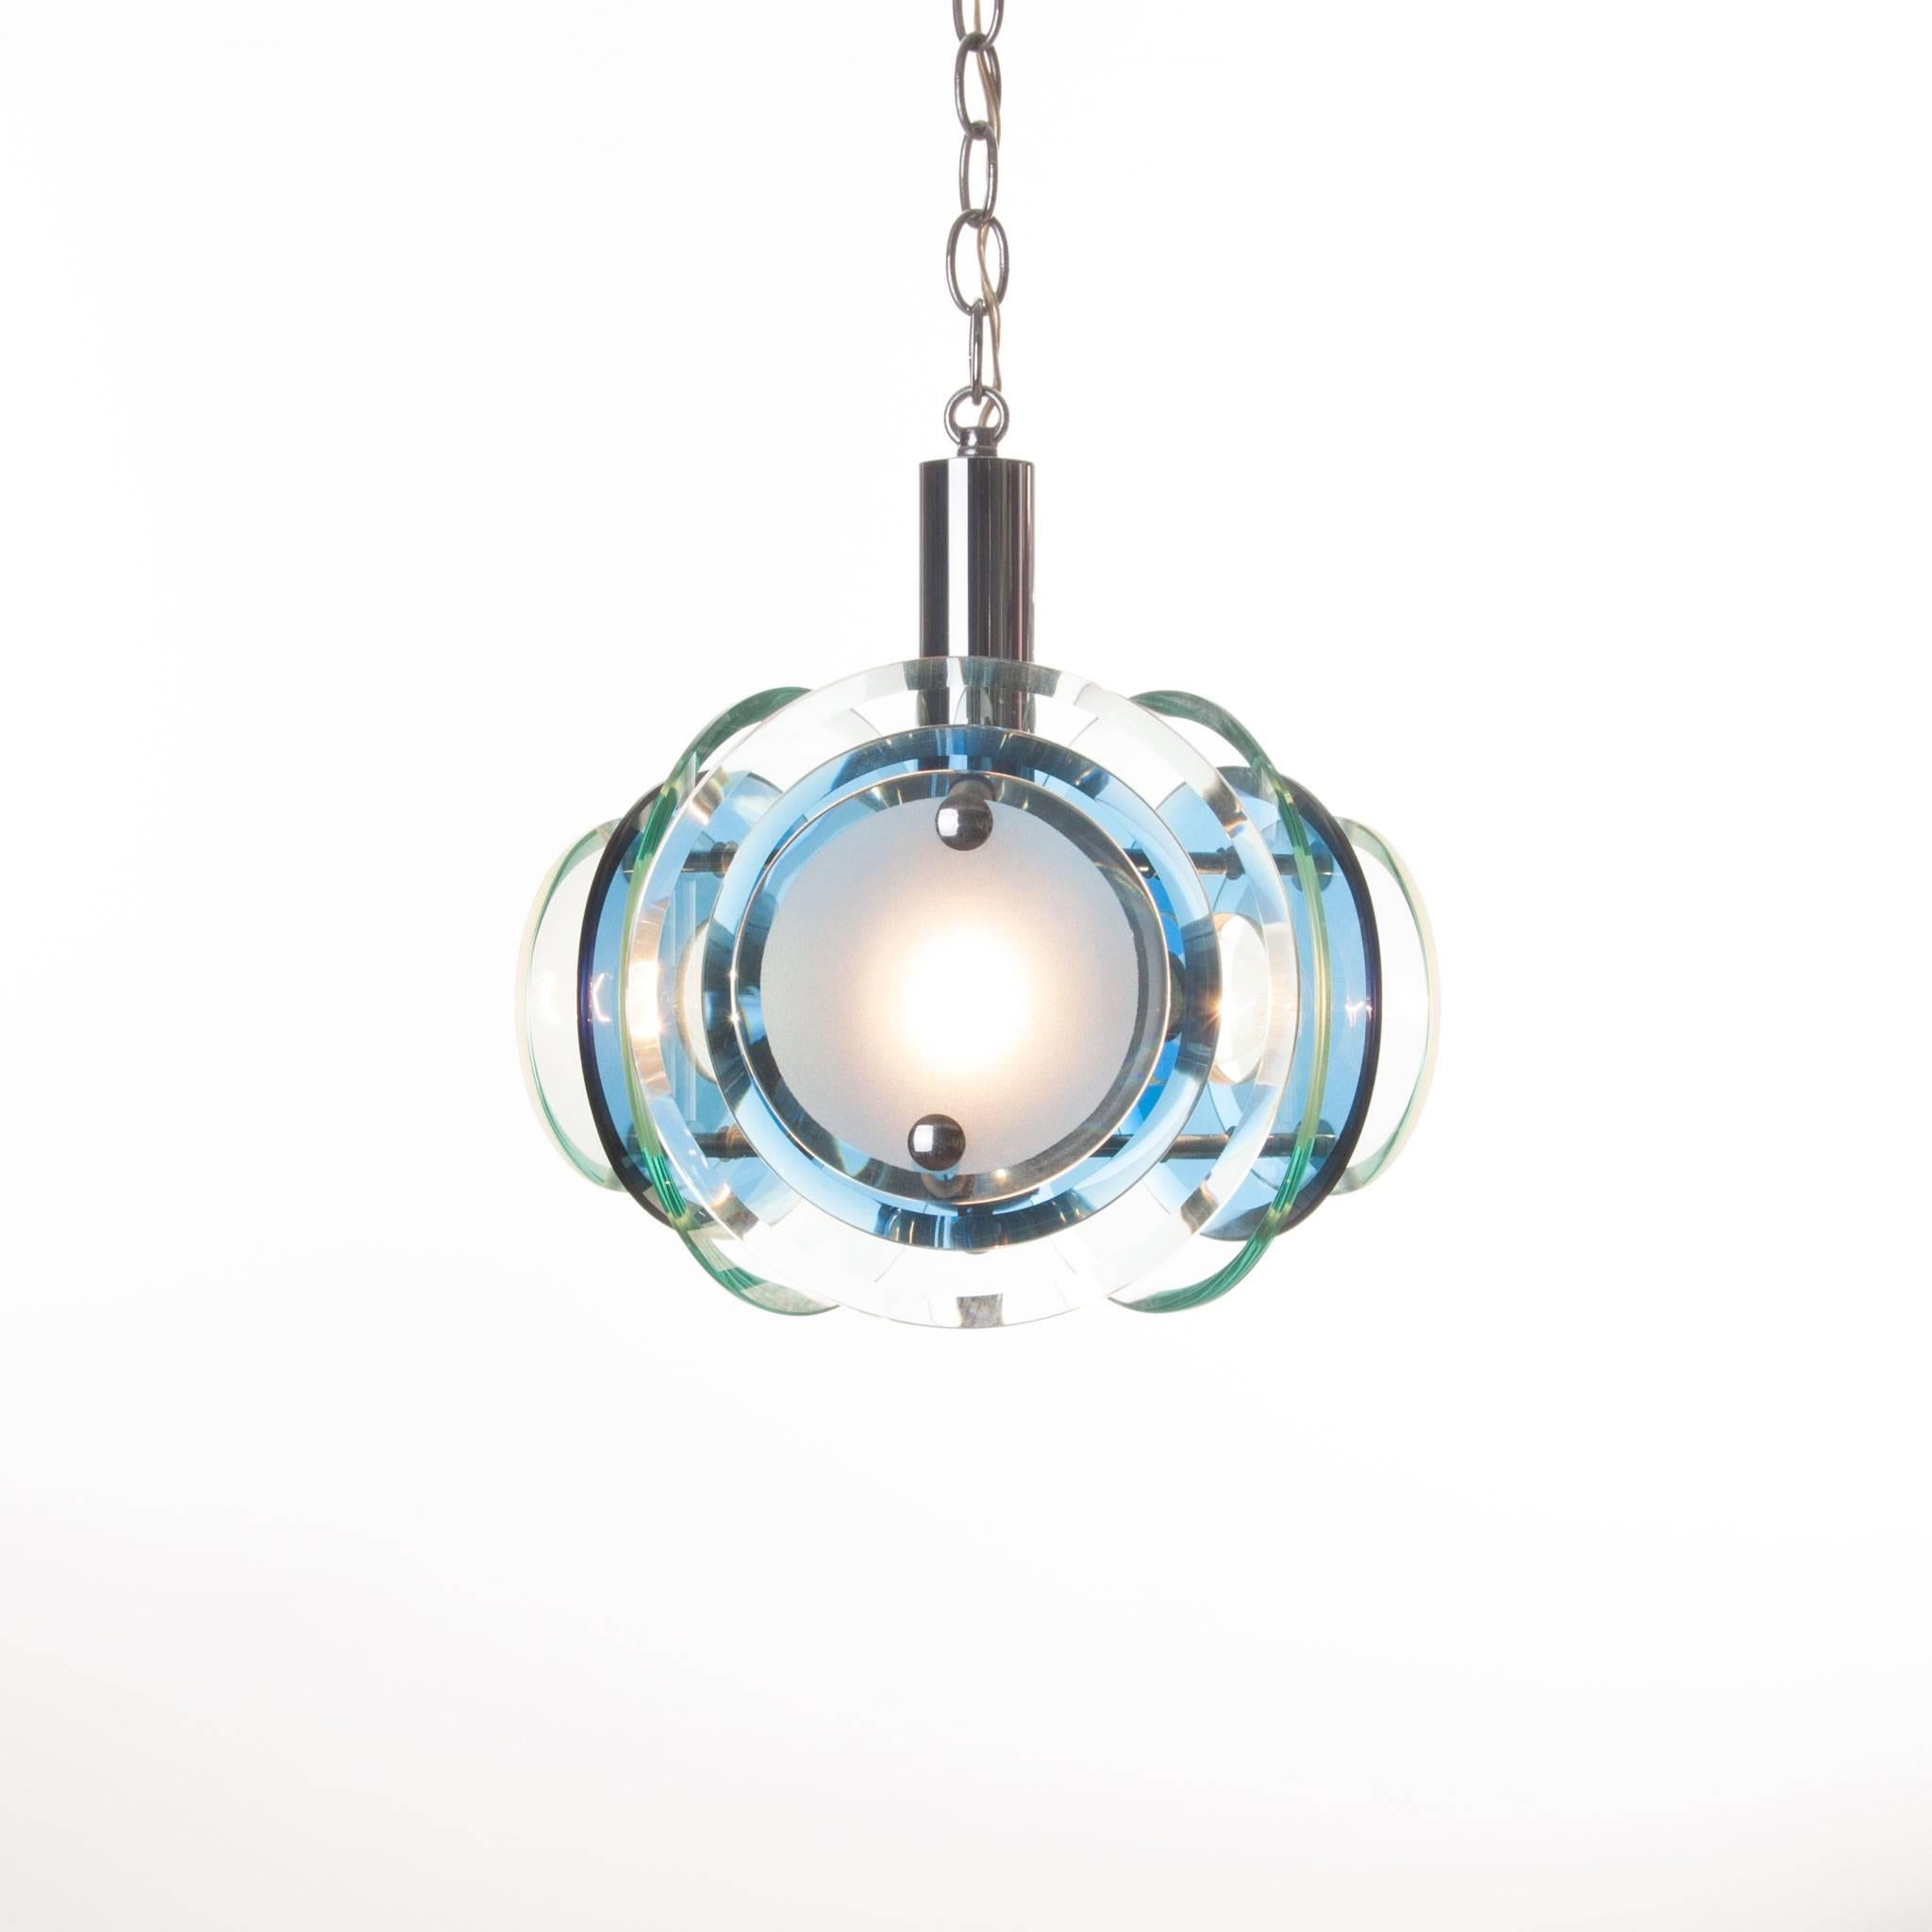 20th Century 1970s Chrome and Glass Pendant Attributed to Veca For Sale